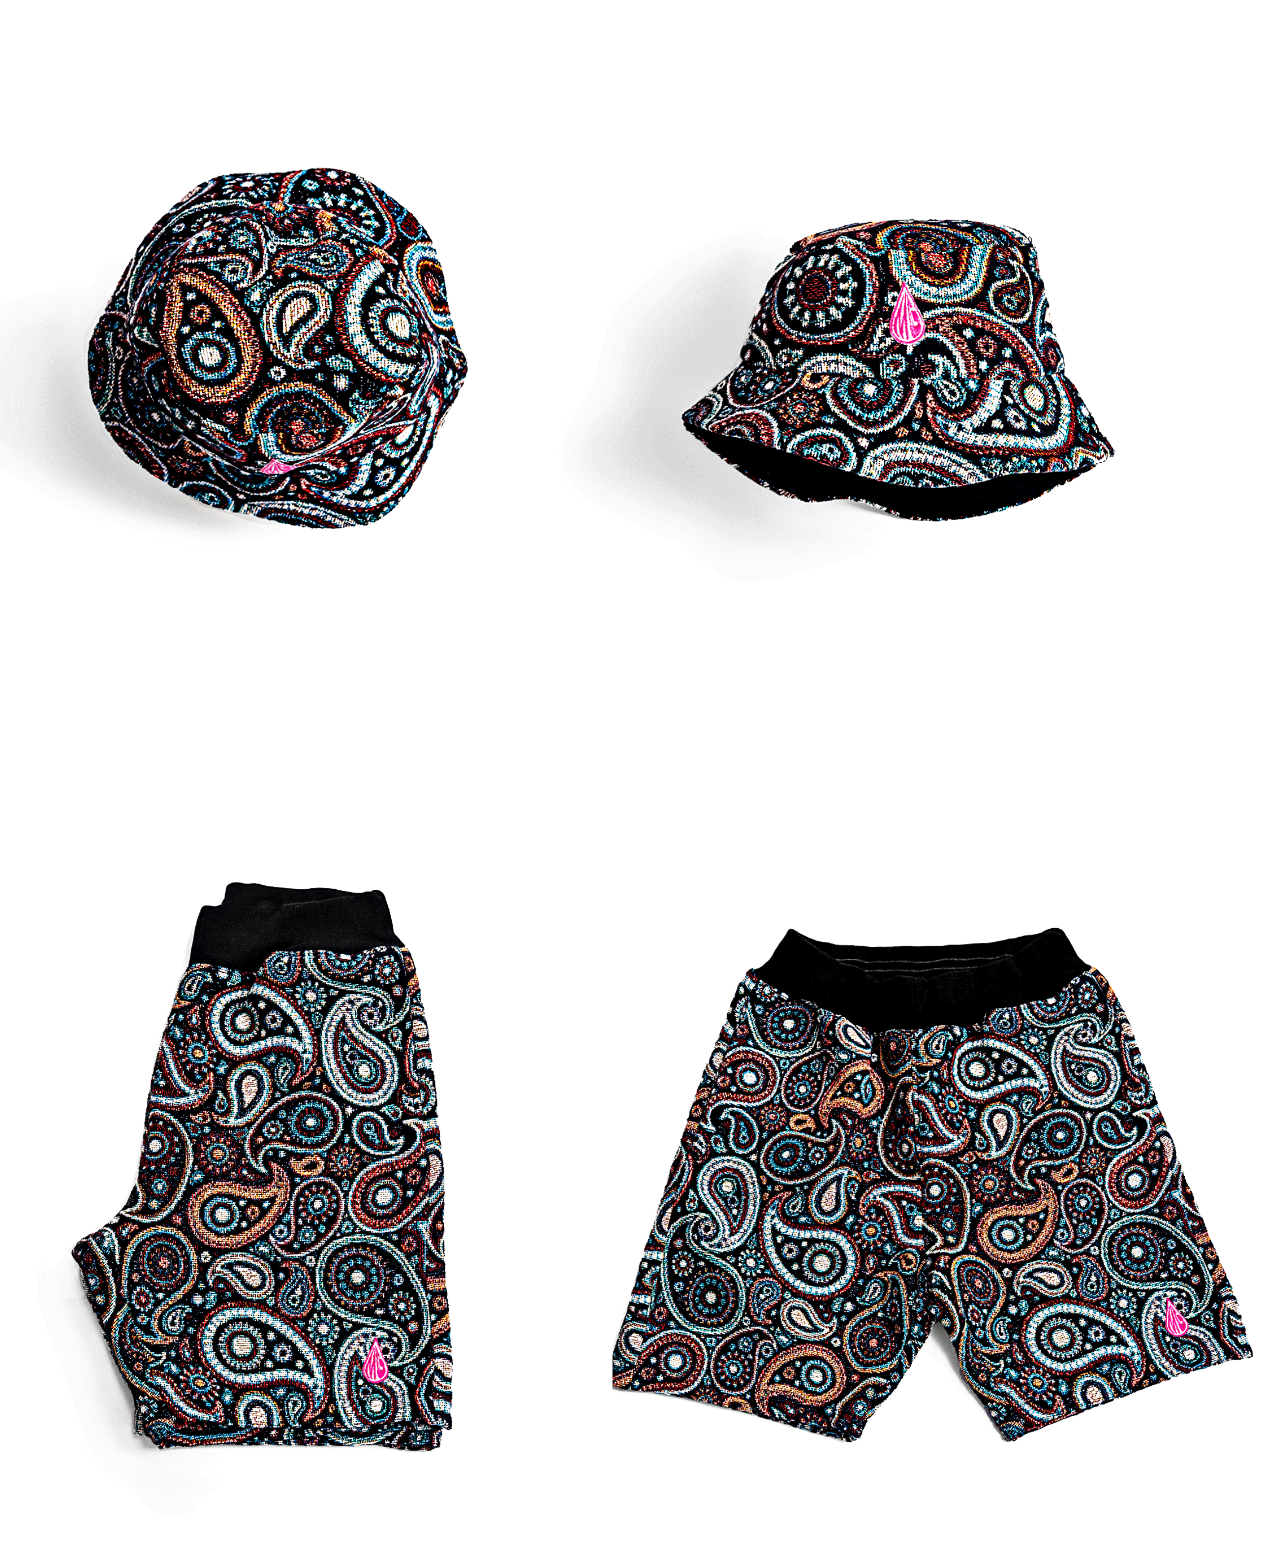 The Groove Tapestry Shorts